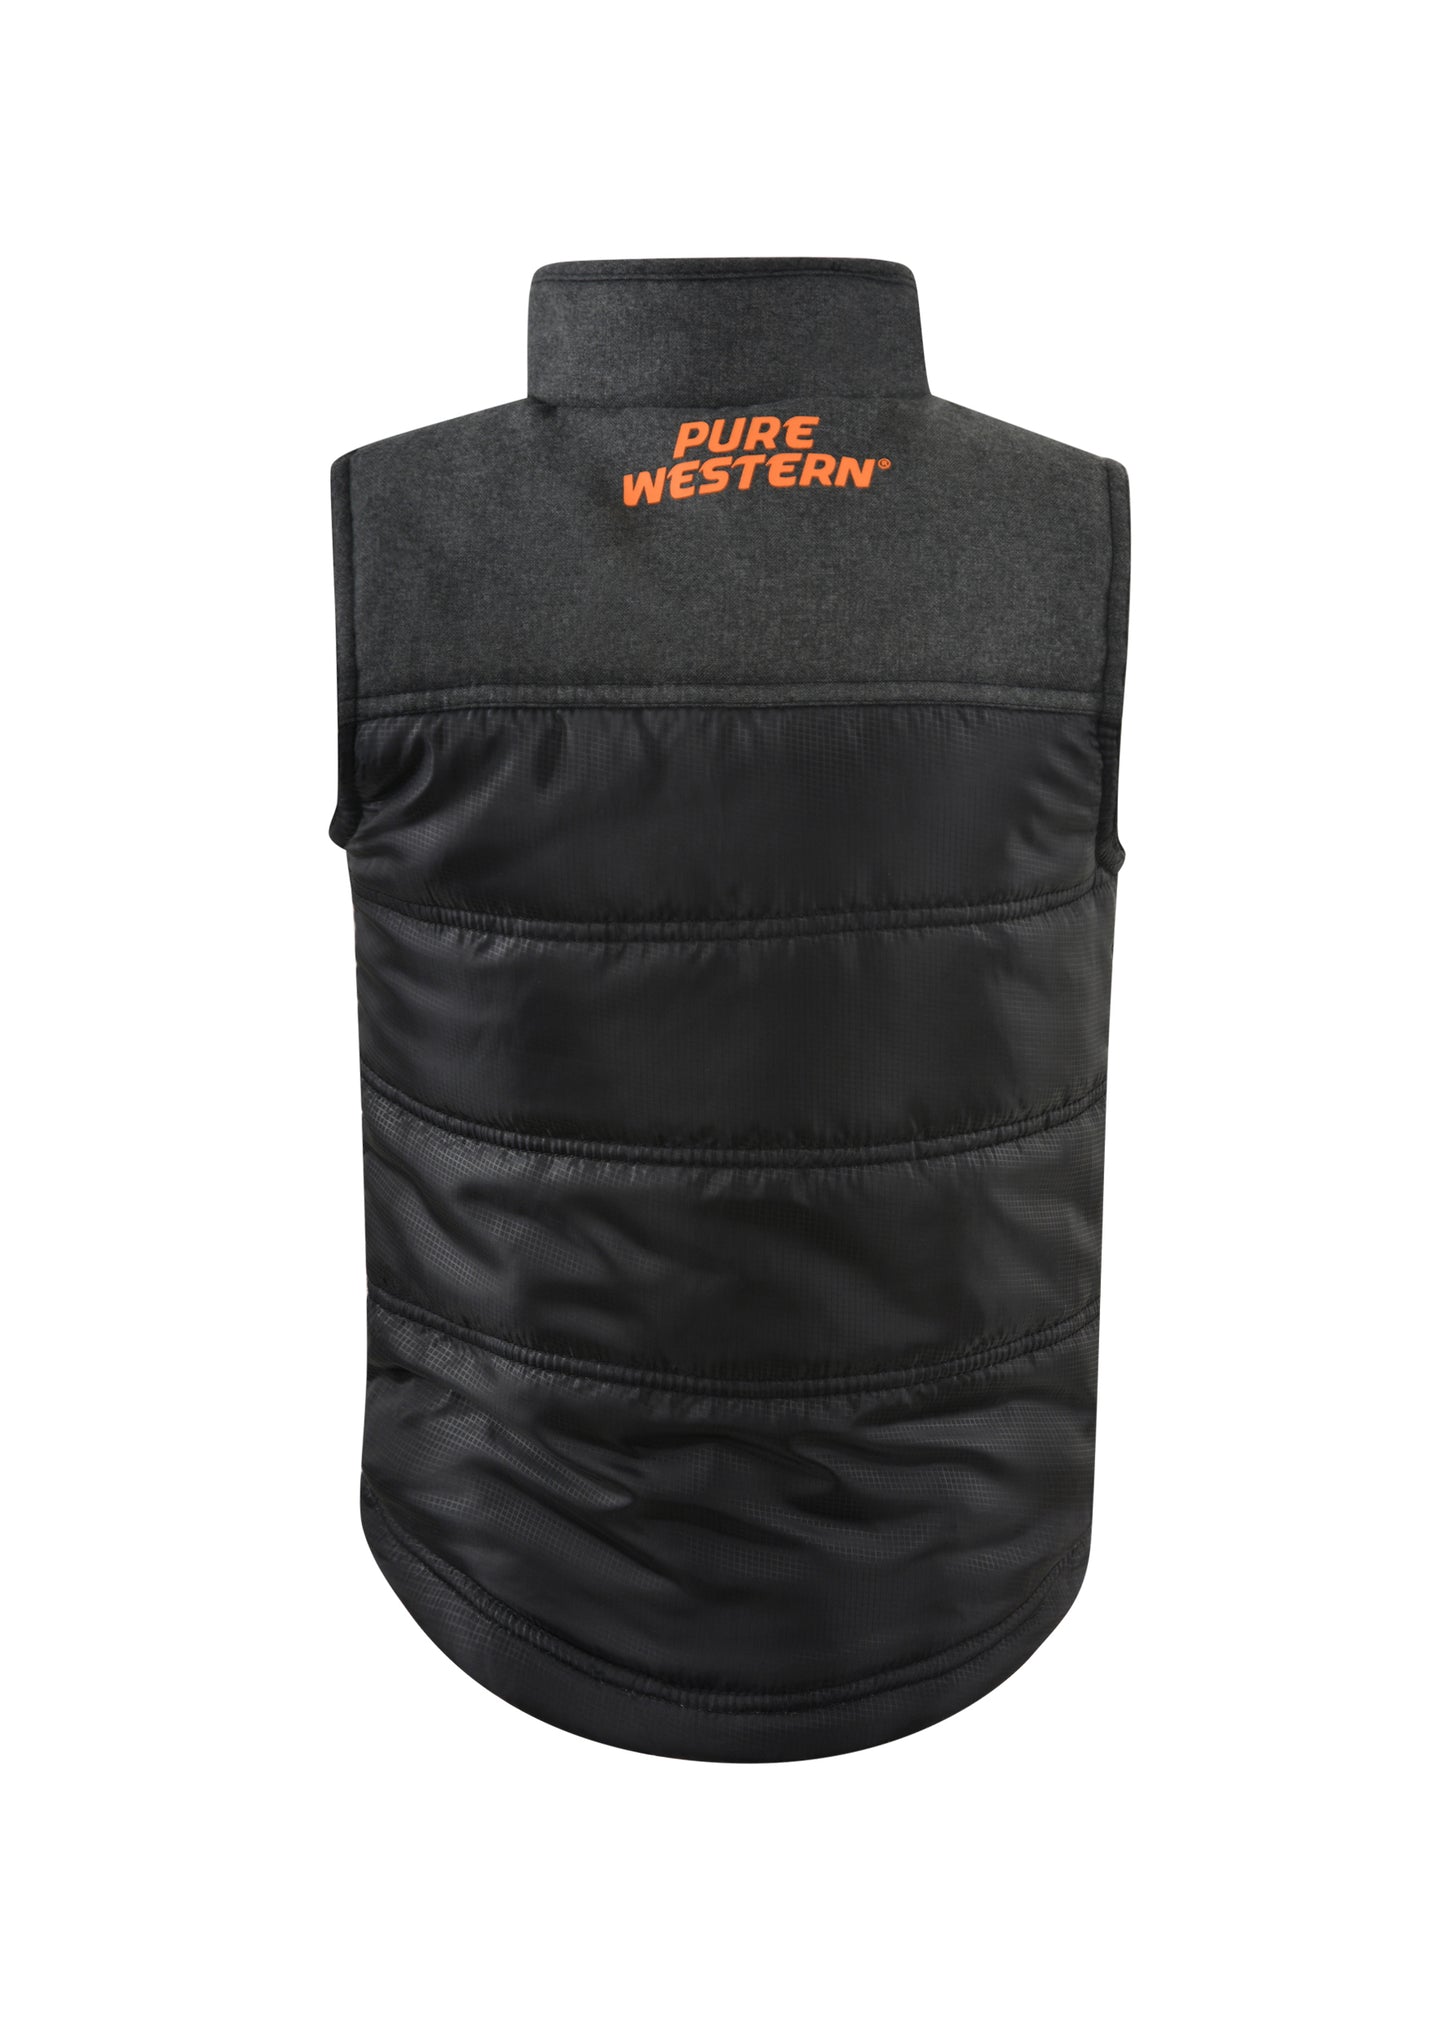 Pure Western Boys Usher Puffervest - Charcoal/Black - On Sale